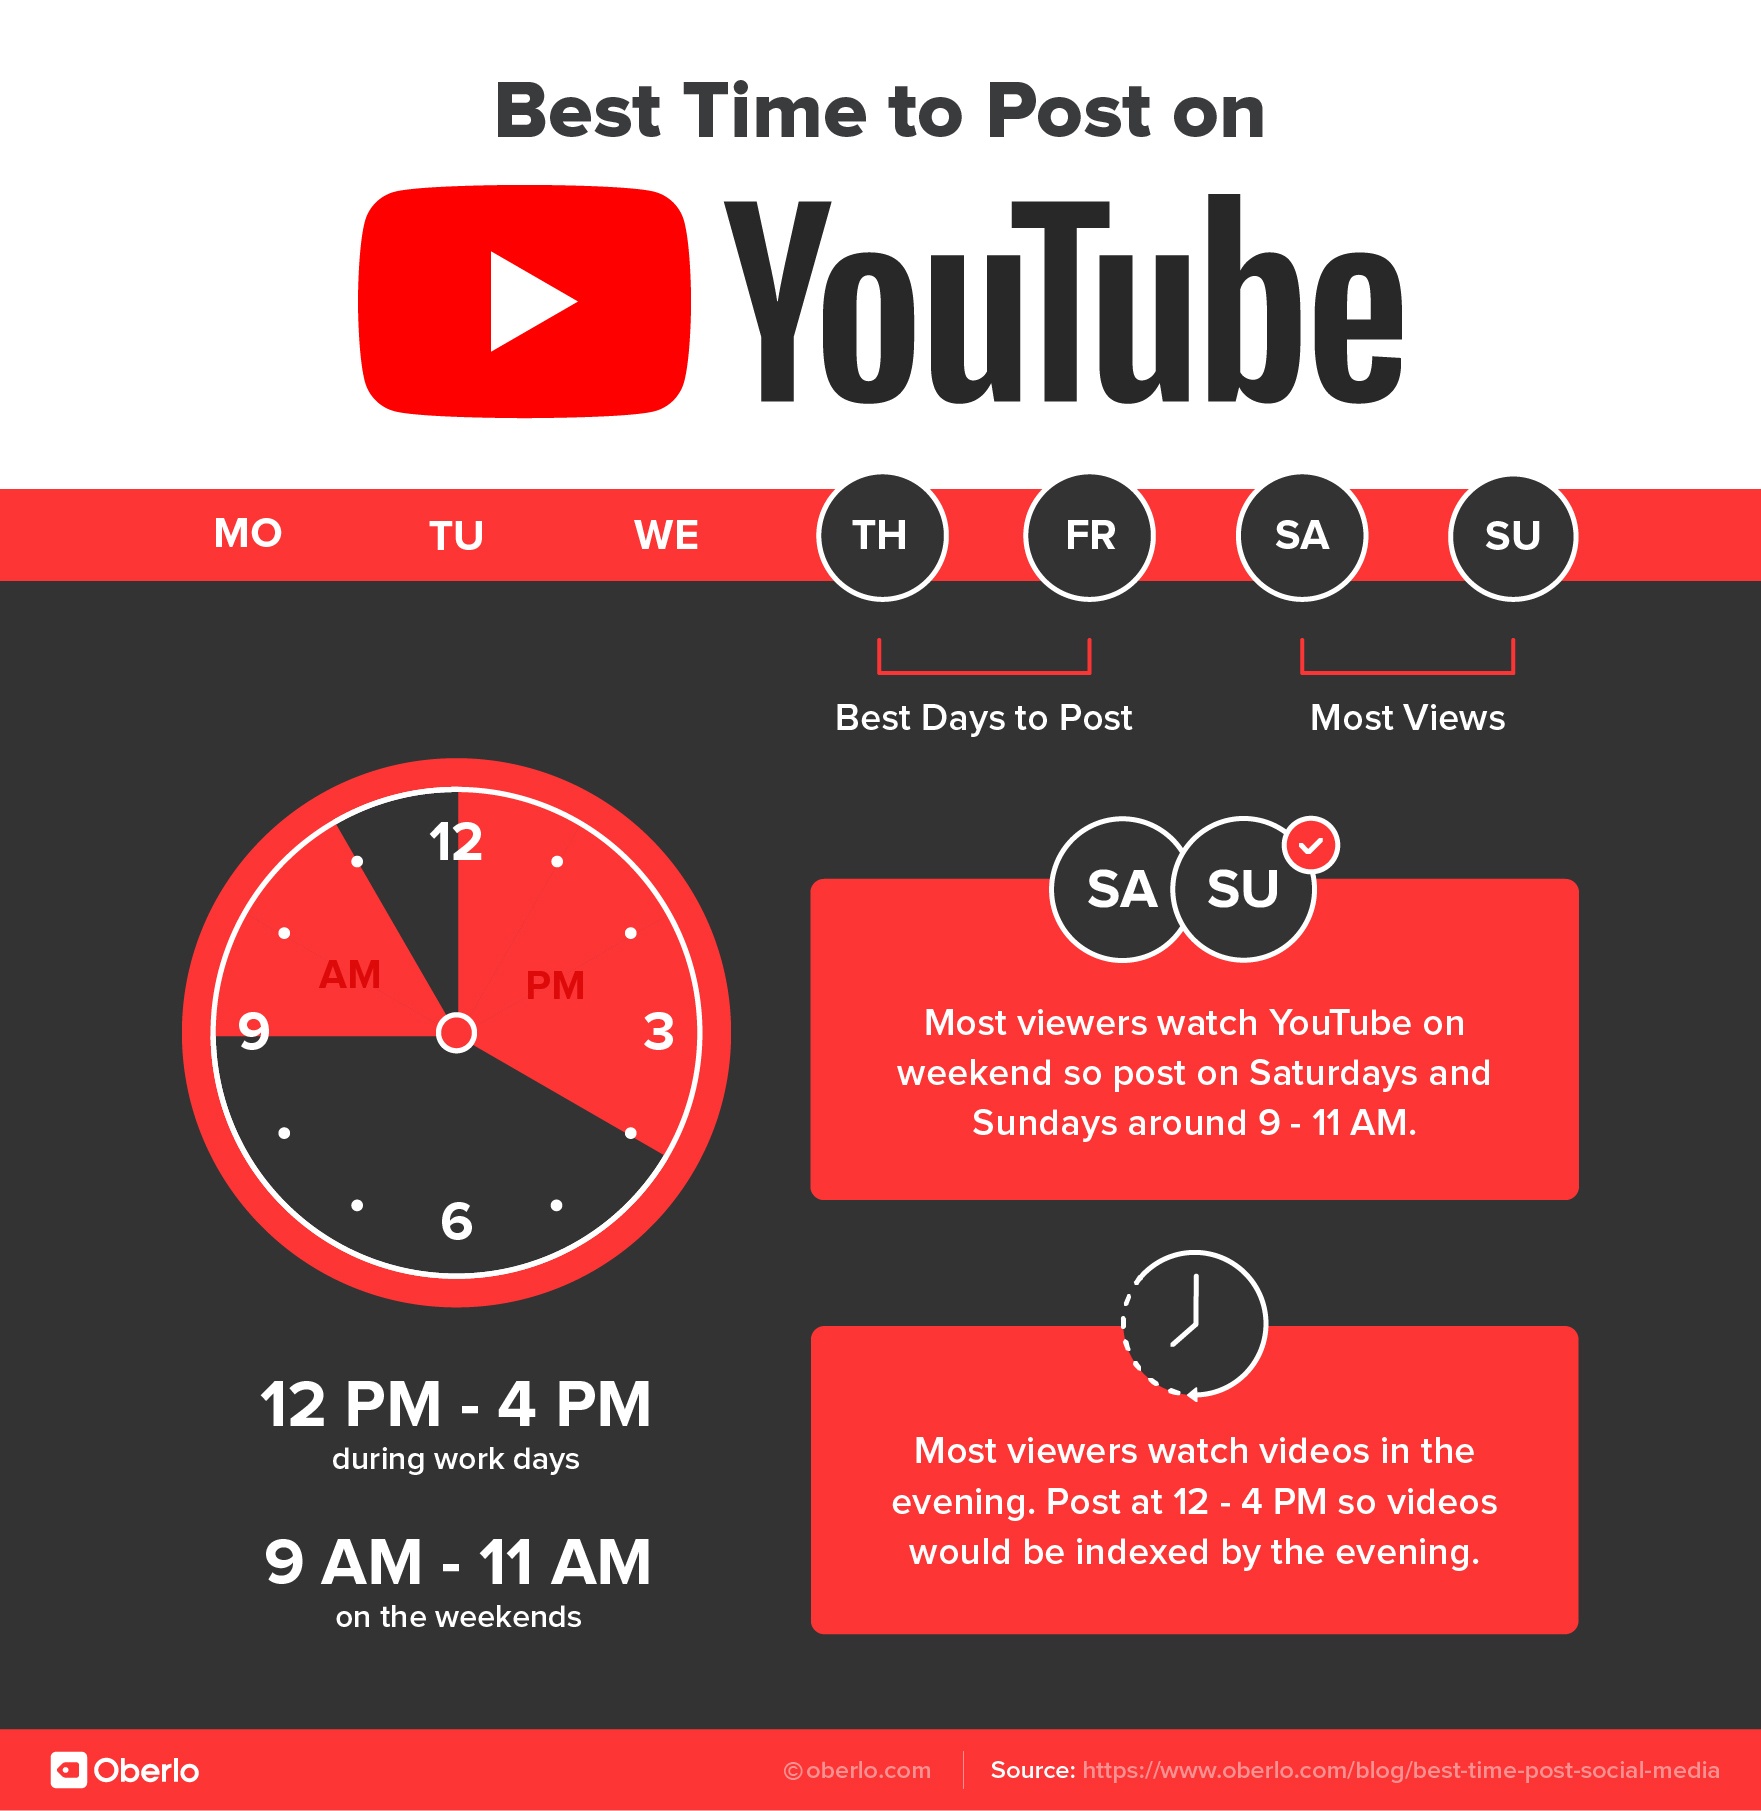 Best Time to Upload to YouTube: Weekday Evenings (Thursday & Friday)